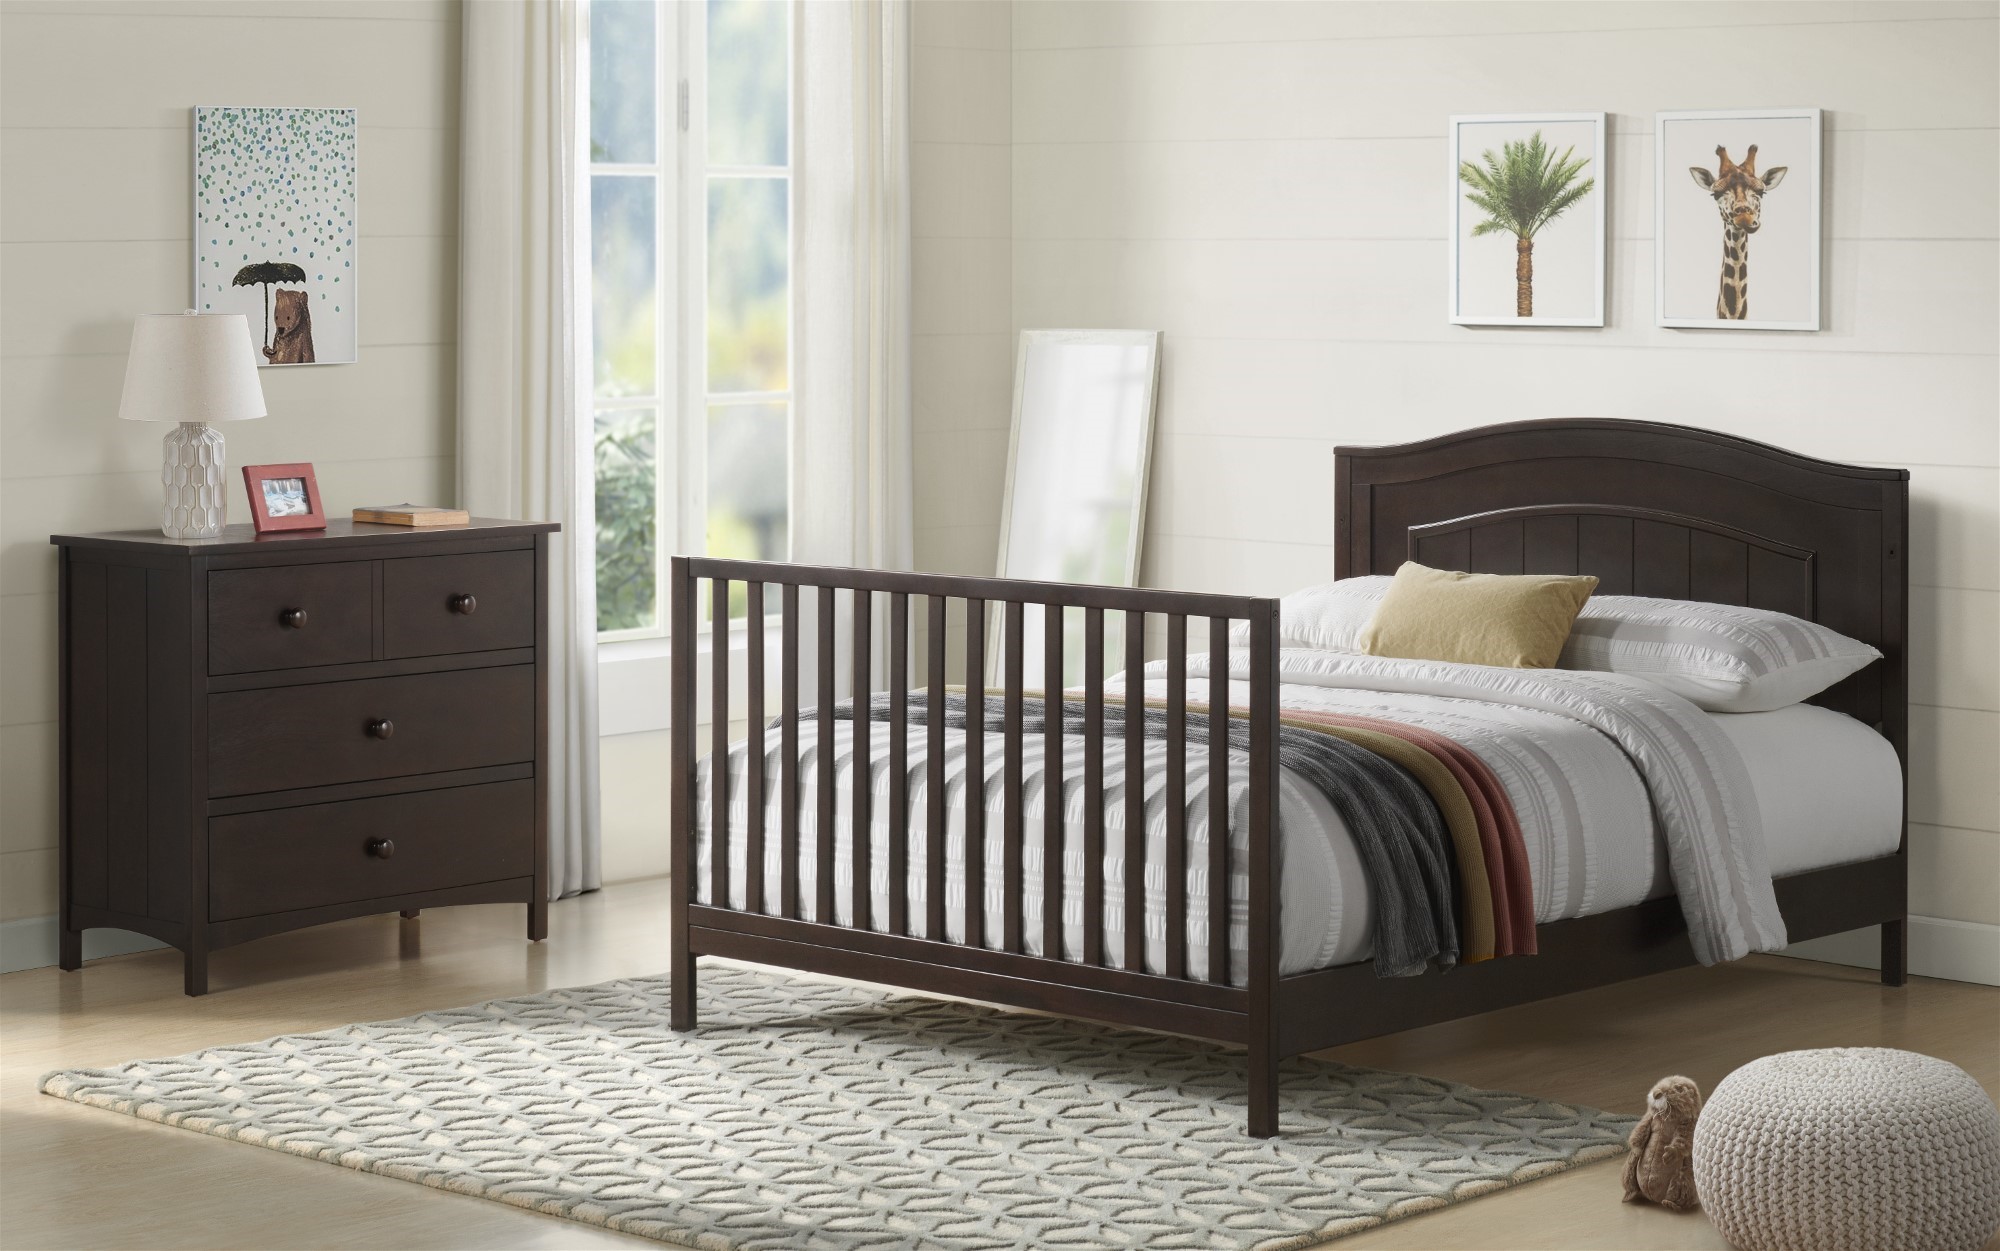 Oxford Baby North Bay 4-in-1 Convertible Crib, Espresso Brown, GREENGUARD Gold Certified - image 3 of 13